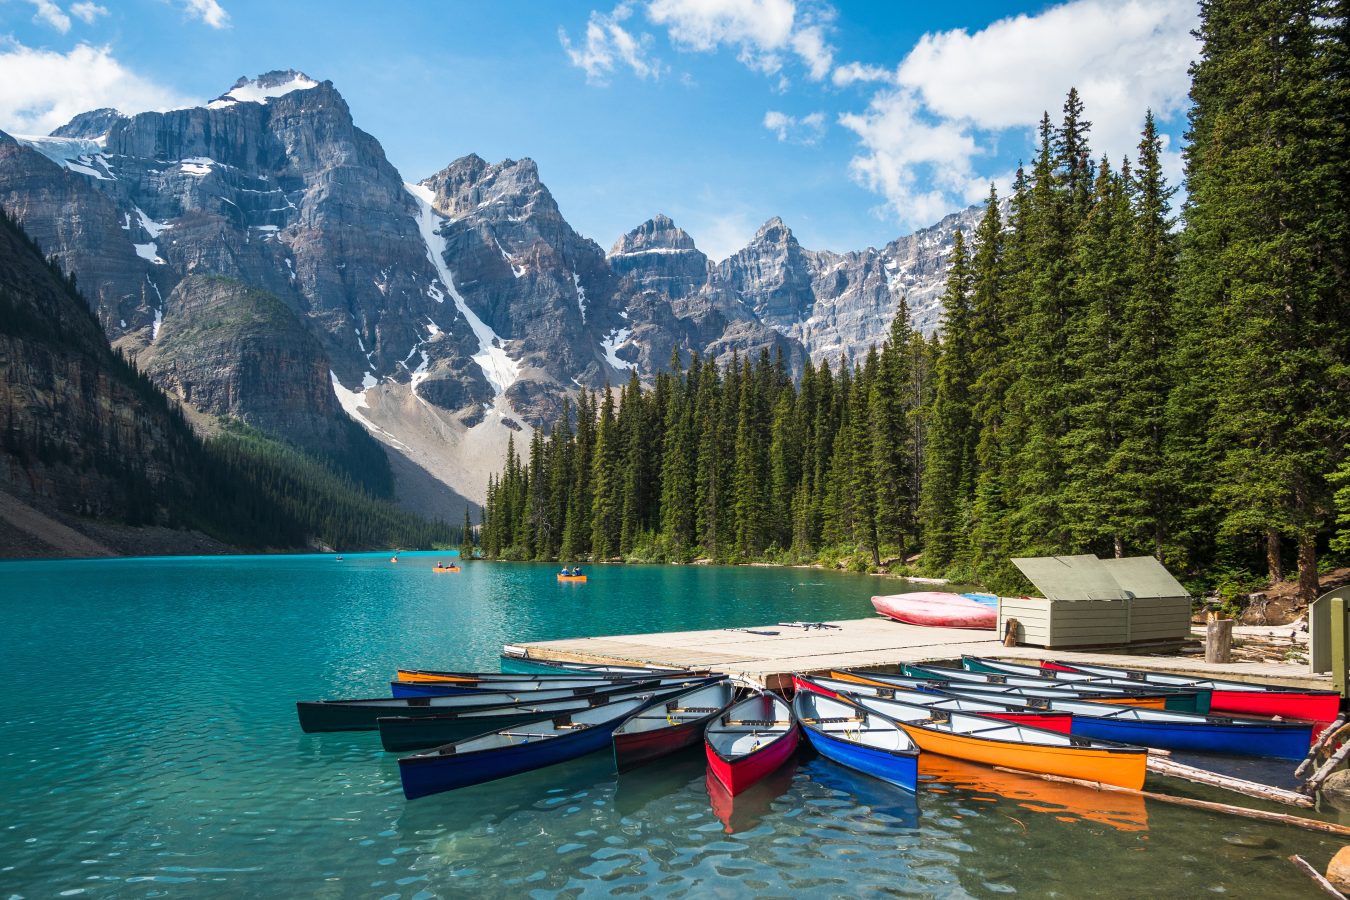 Lake Moraine in Banff National Park, with a bunch of canoes on the dock in the foreground.